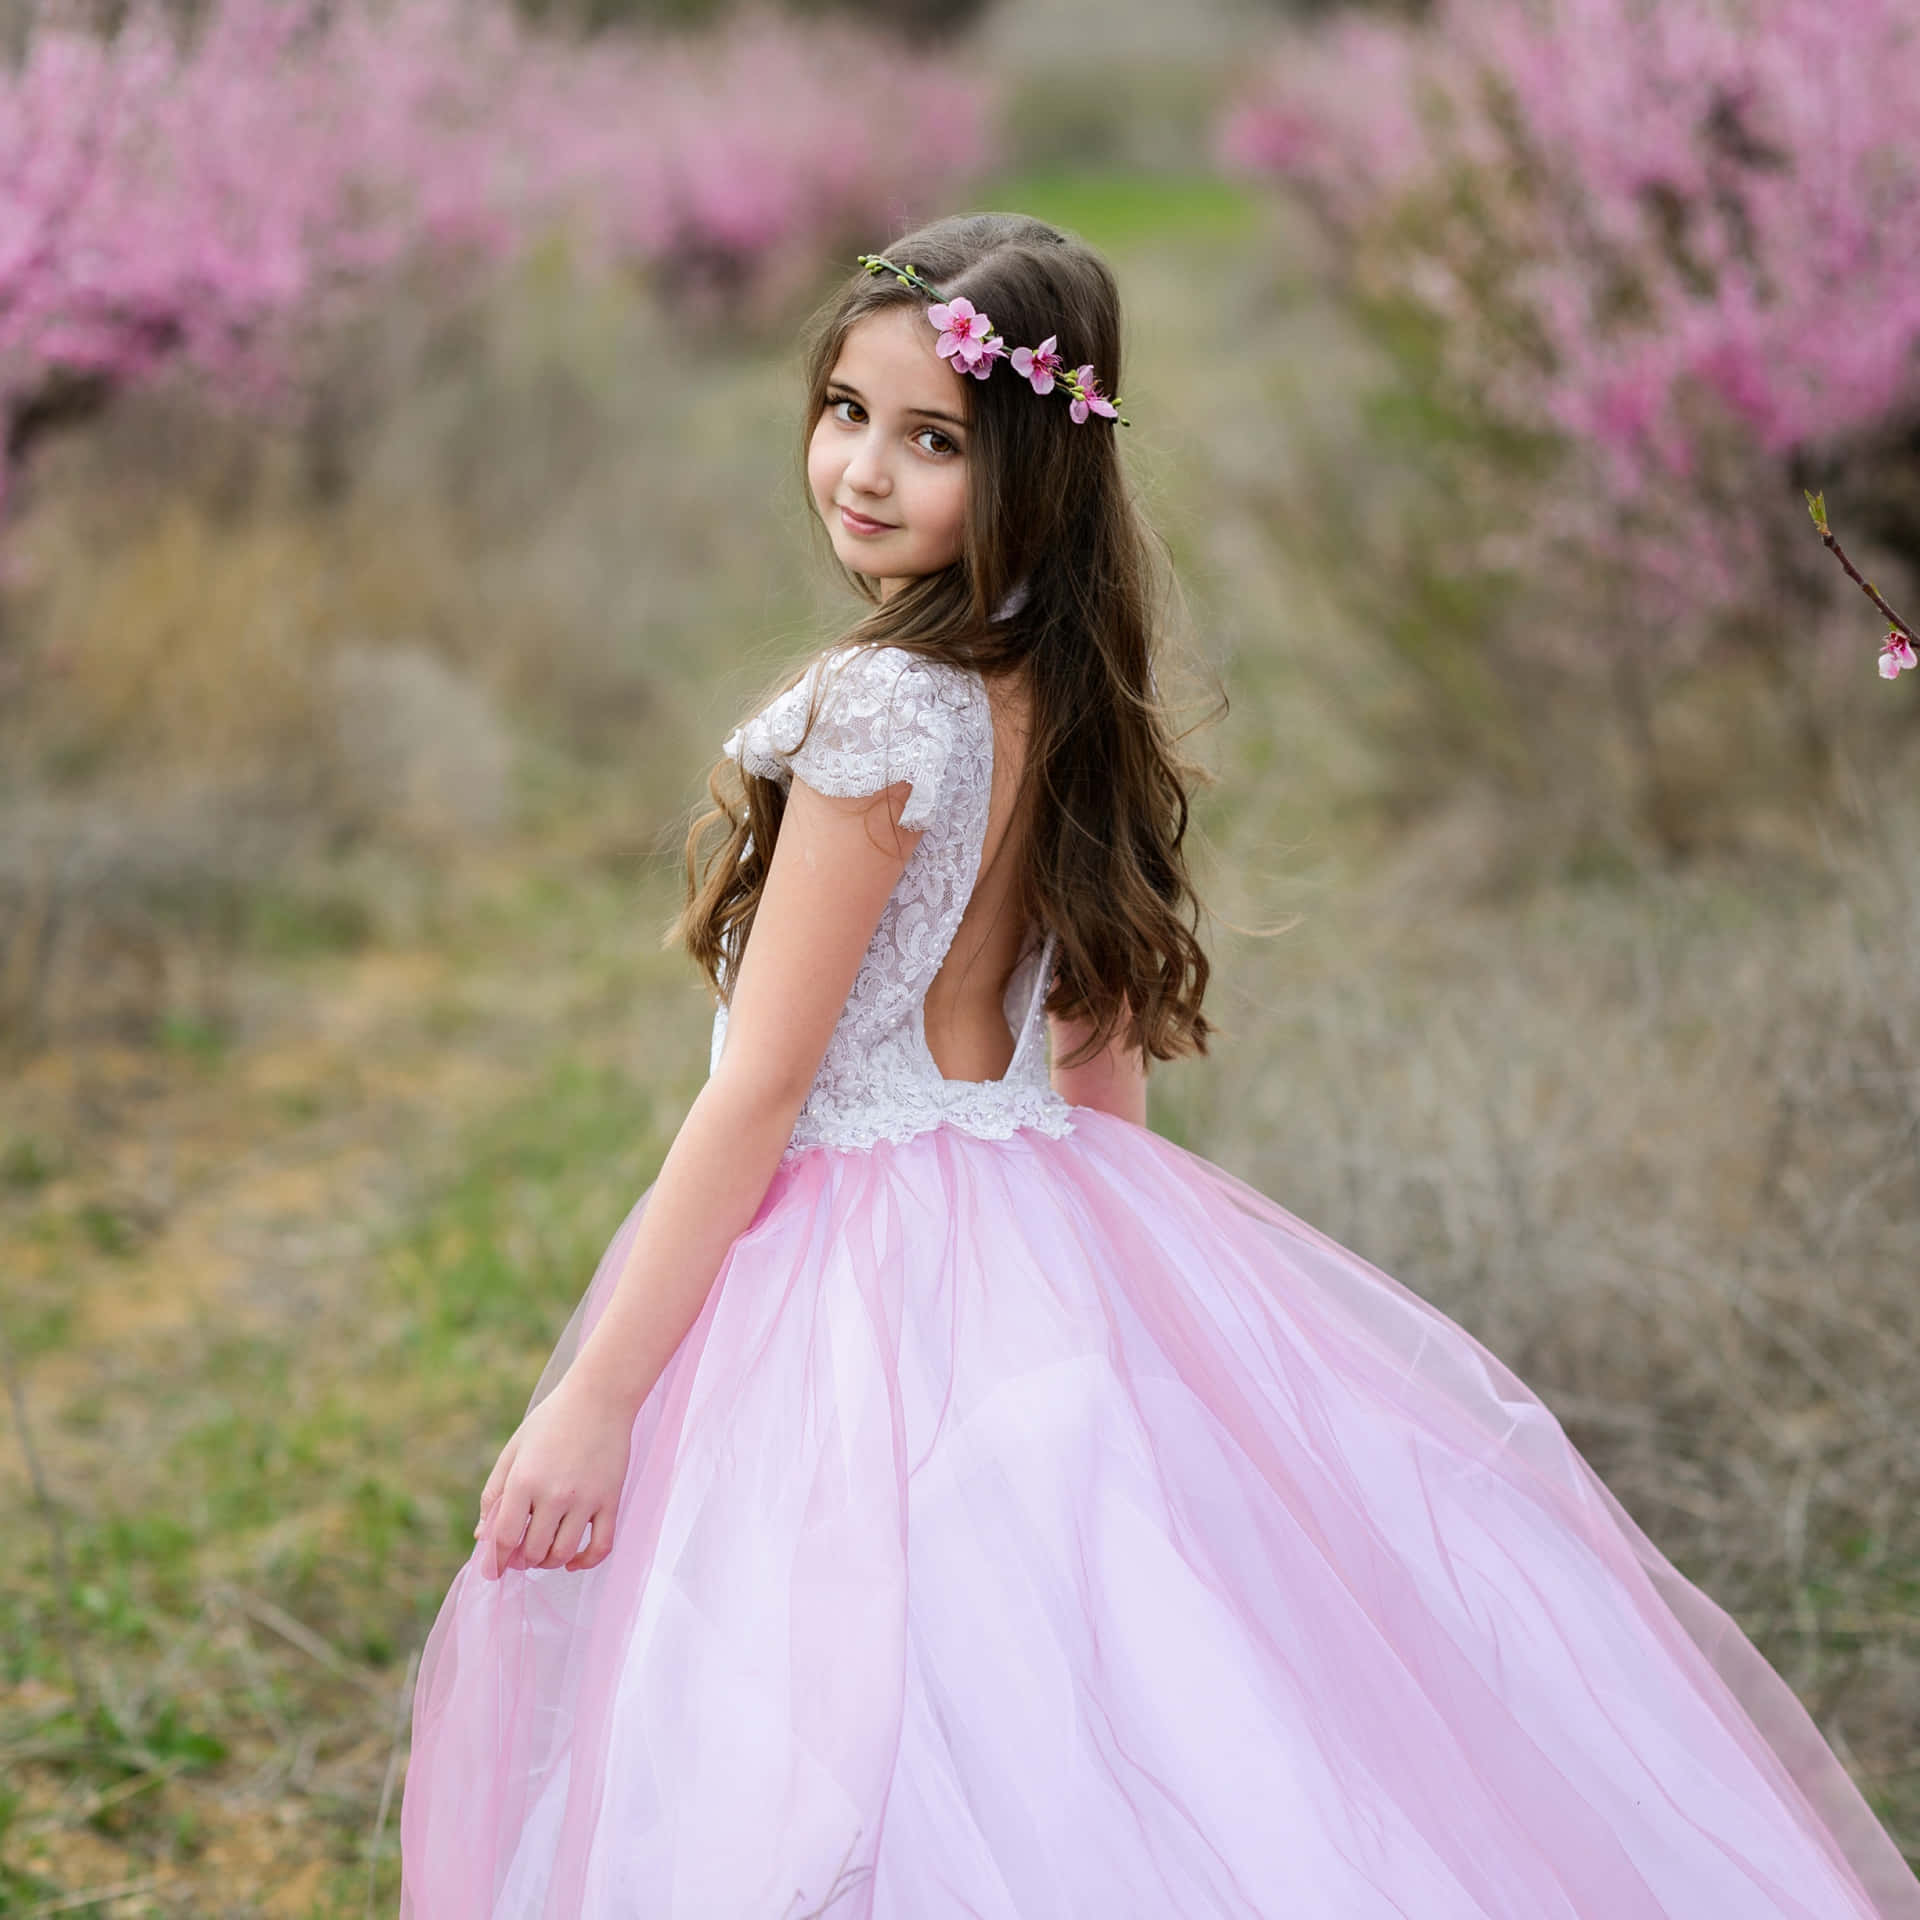 Enchanting Beauty In Pink - A Pretty Girl Adorned In A Princess Dress Background